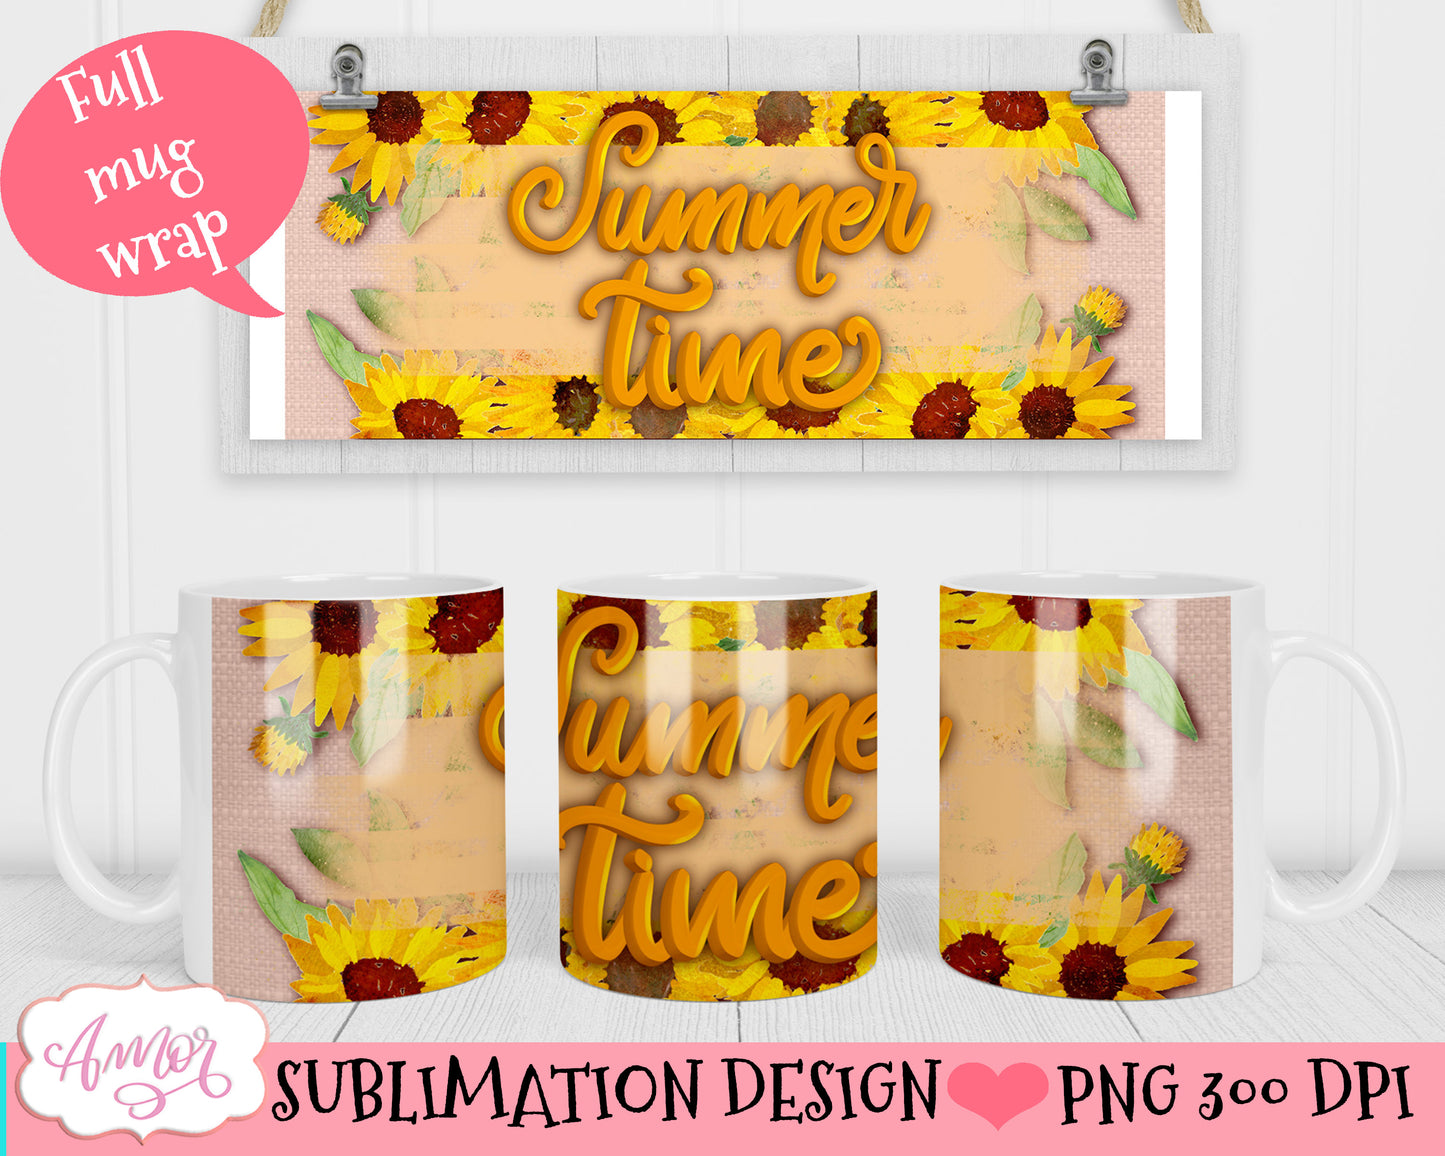 Summer time mug wrap PNG sublimation with sunflowers